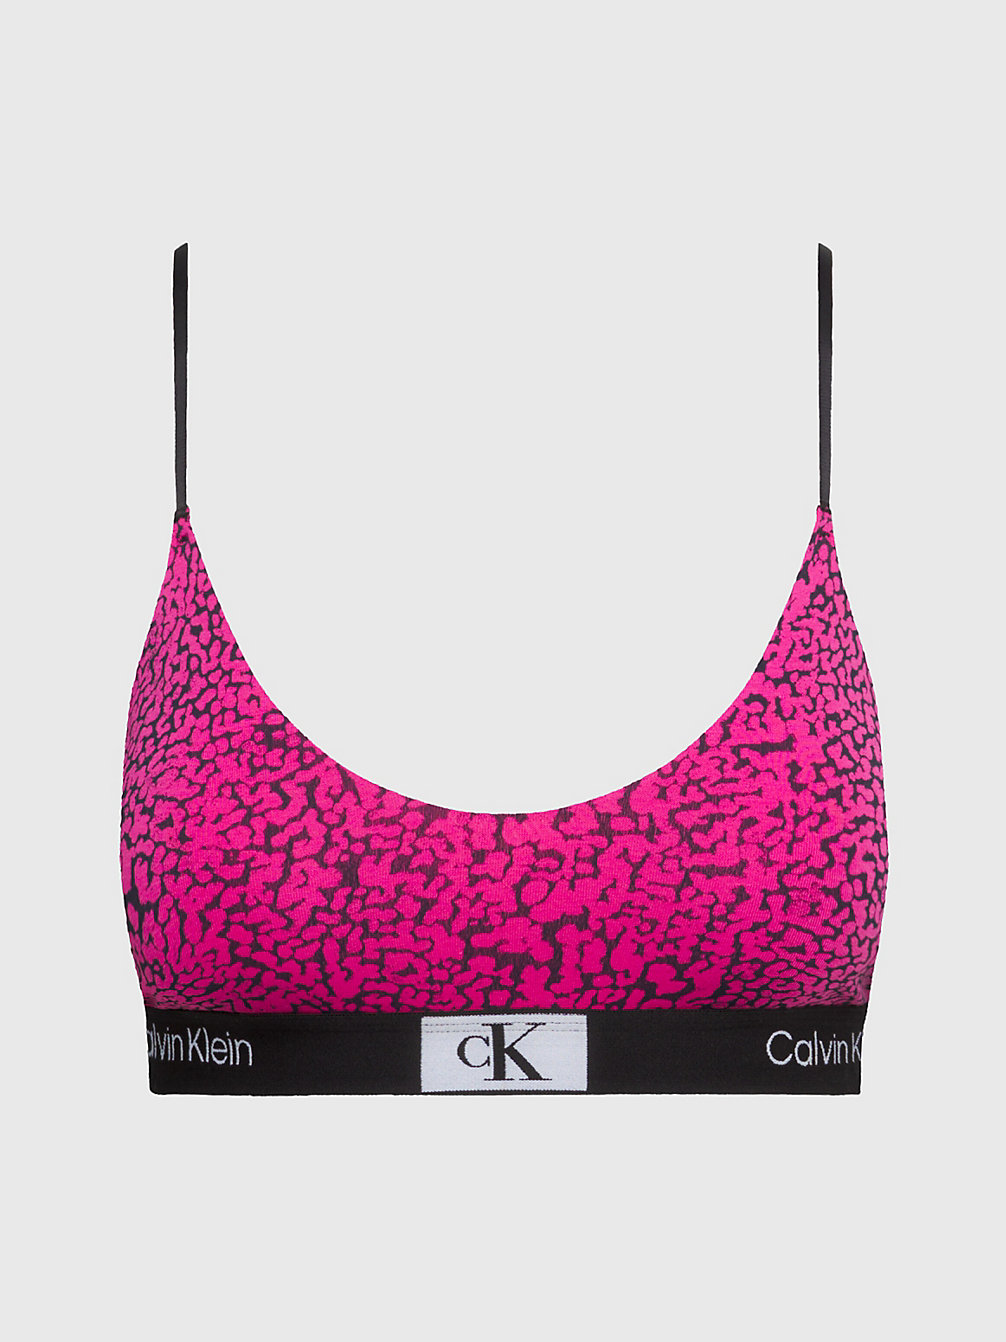 Brassière Sottile - Ck96 > ABSTRACT SPOTS - FUCHSIA ROSE > undefined donna > Calvin Klein